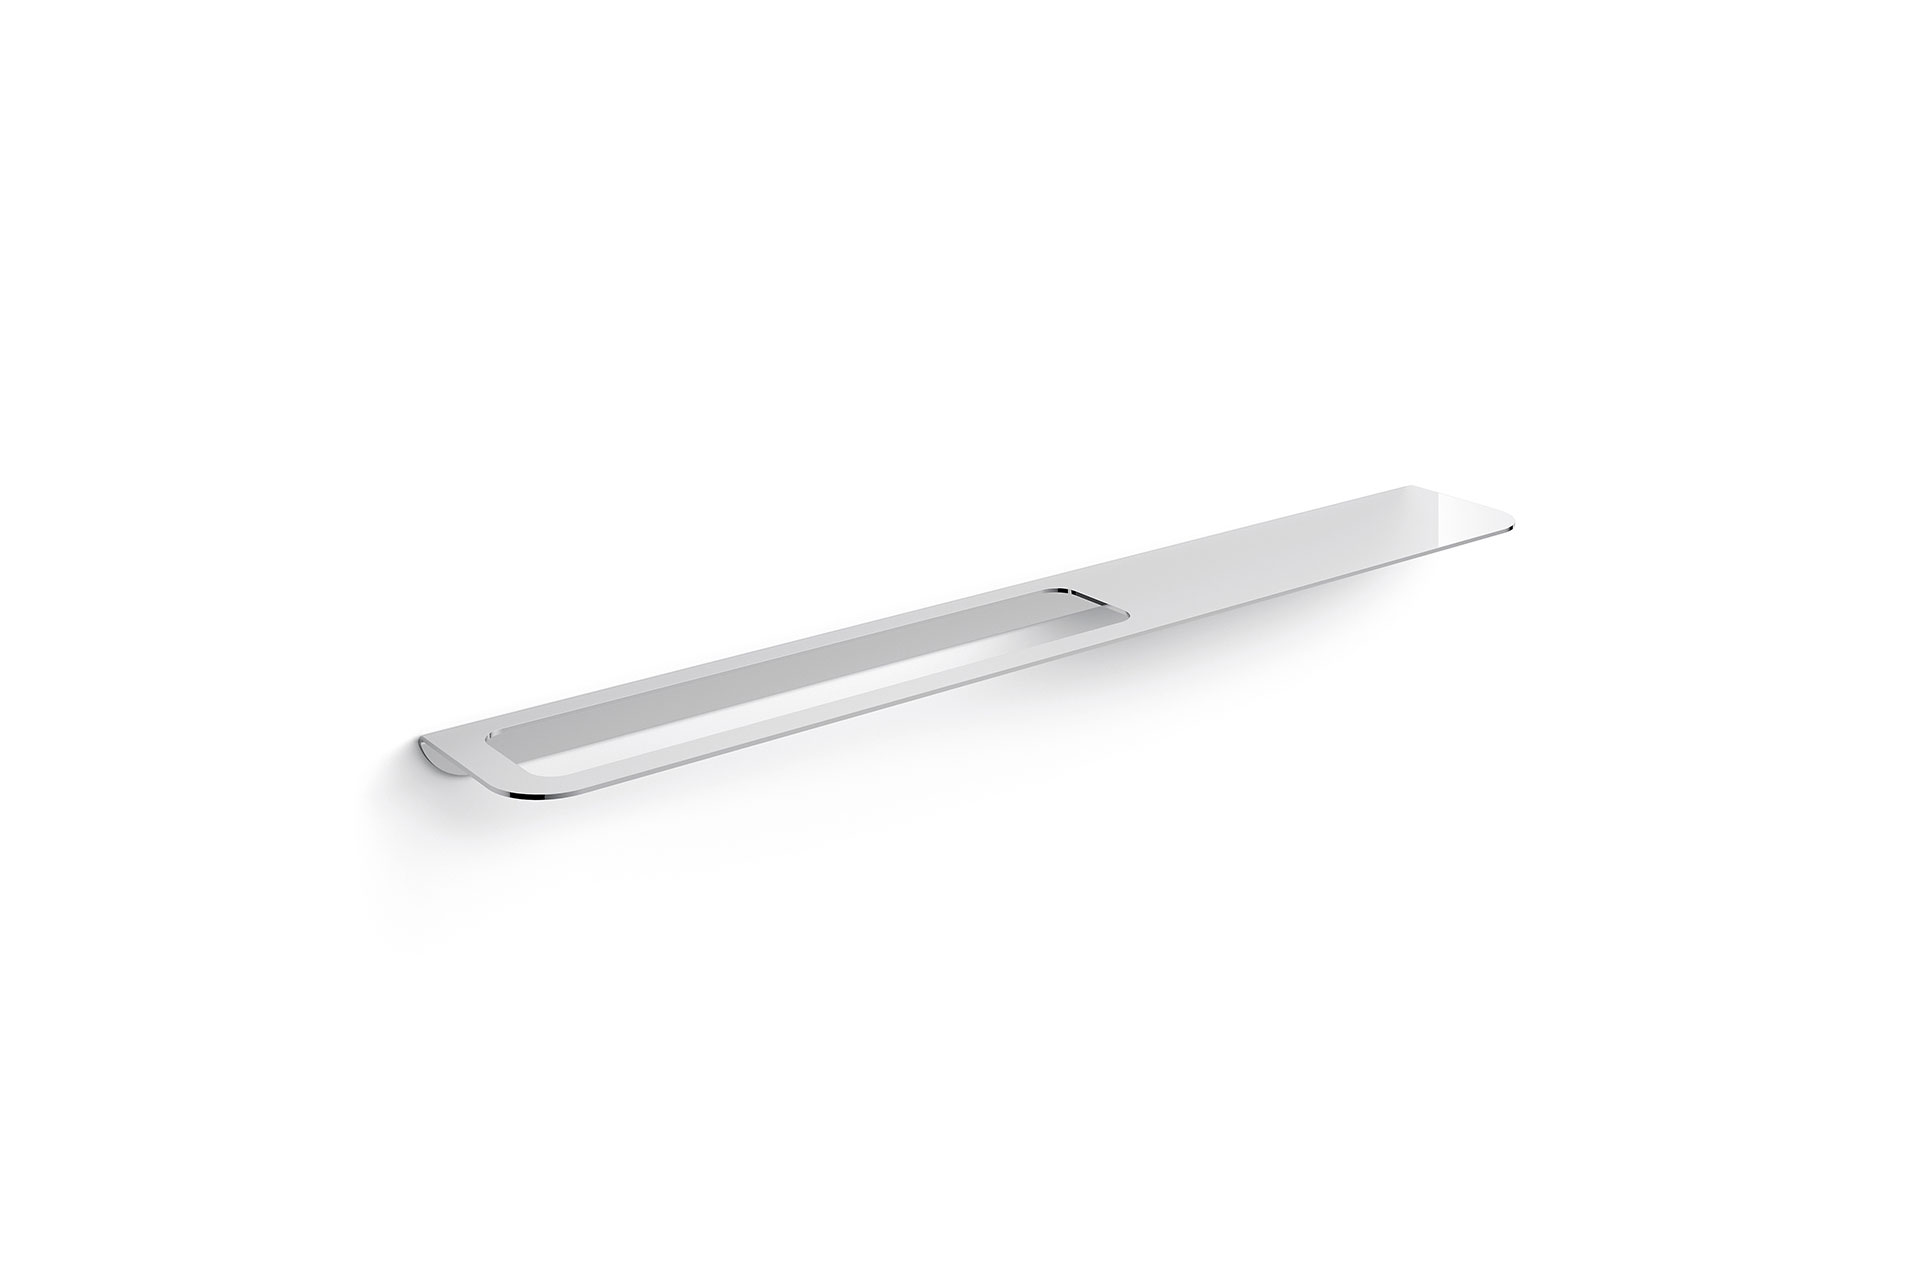 Towel holder and accessories bar 800 mm, left hole